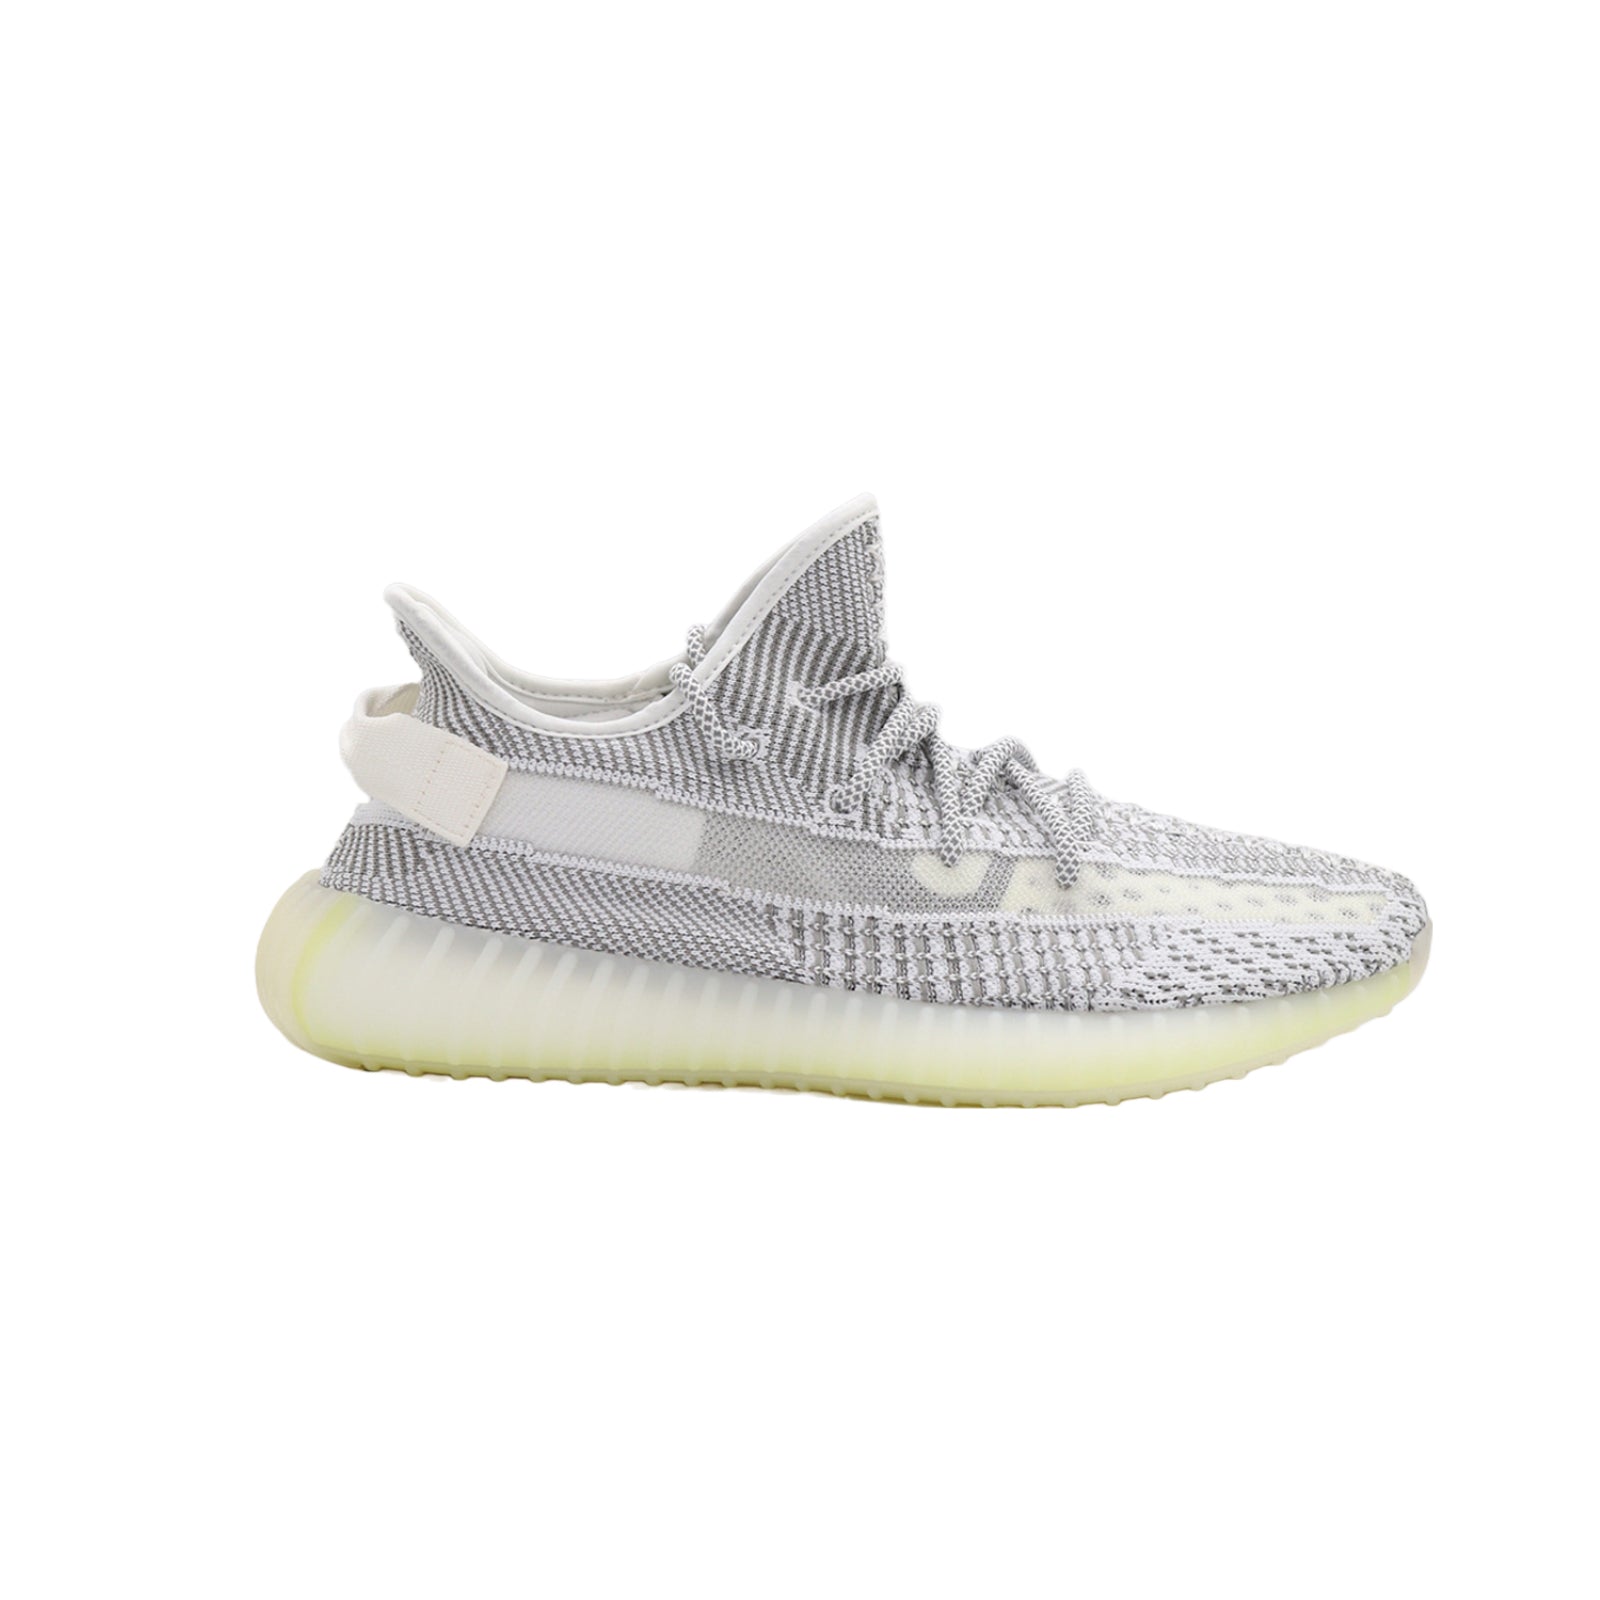 Yeezy Boost 350 V2, Static (Non-Reflective)